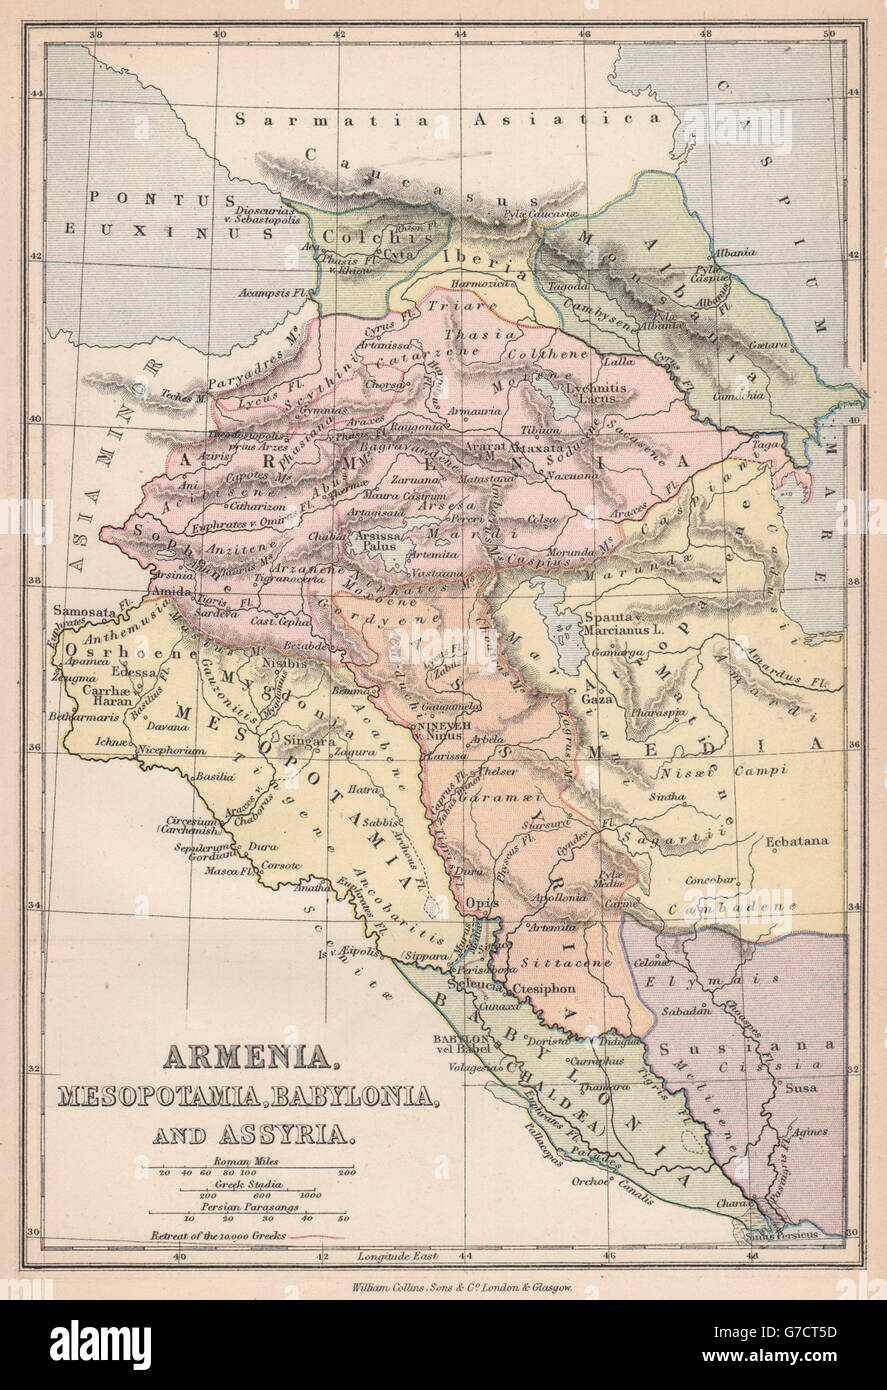 ANCIENT PERSIAN EMPIRE. Shows retreat of 10,000 Greeks. Cyrus Younger, 1878 map Stock Photo